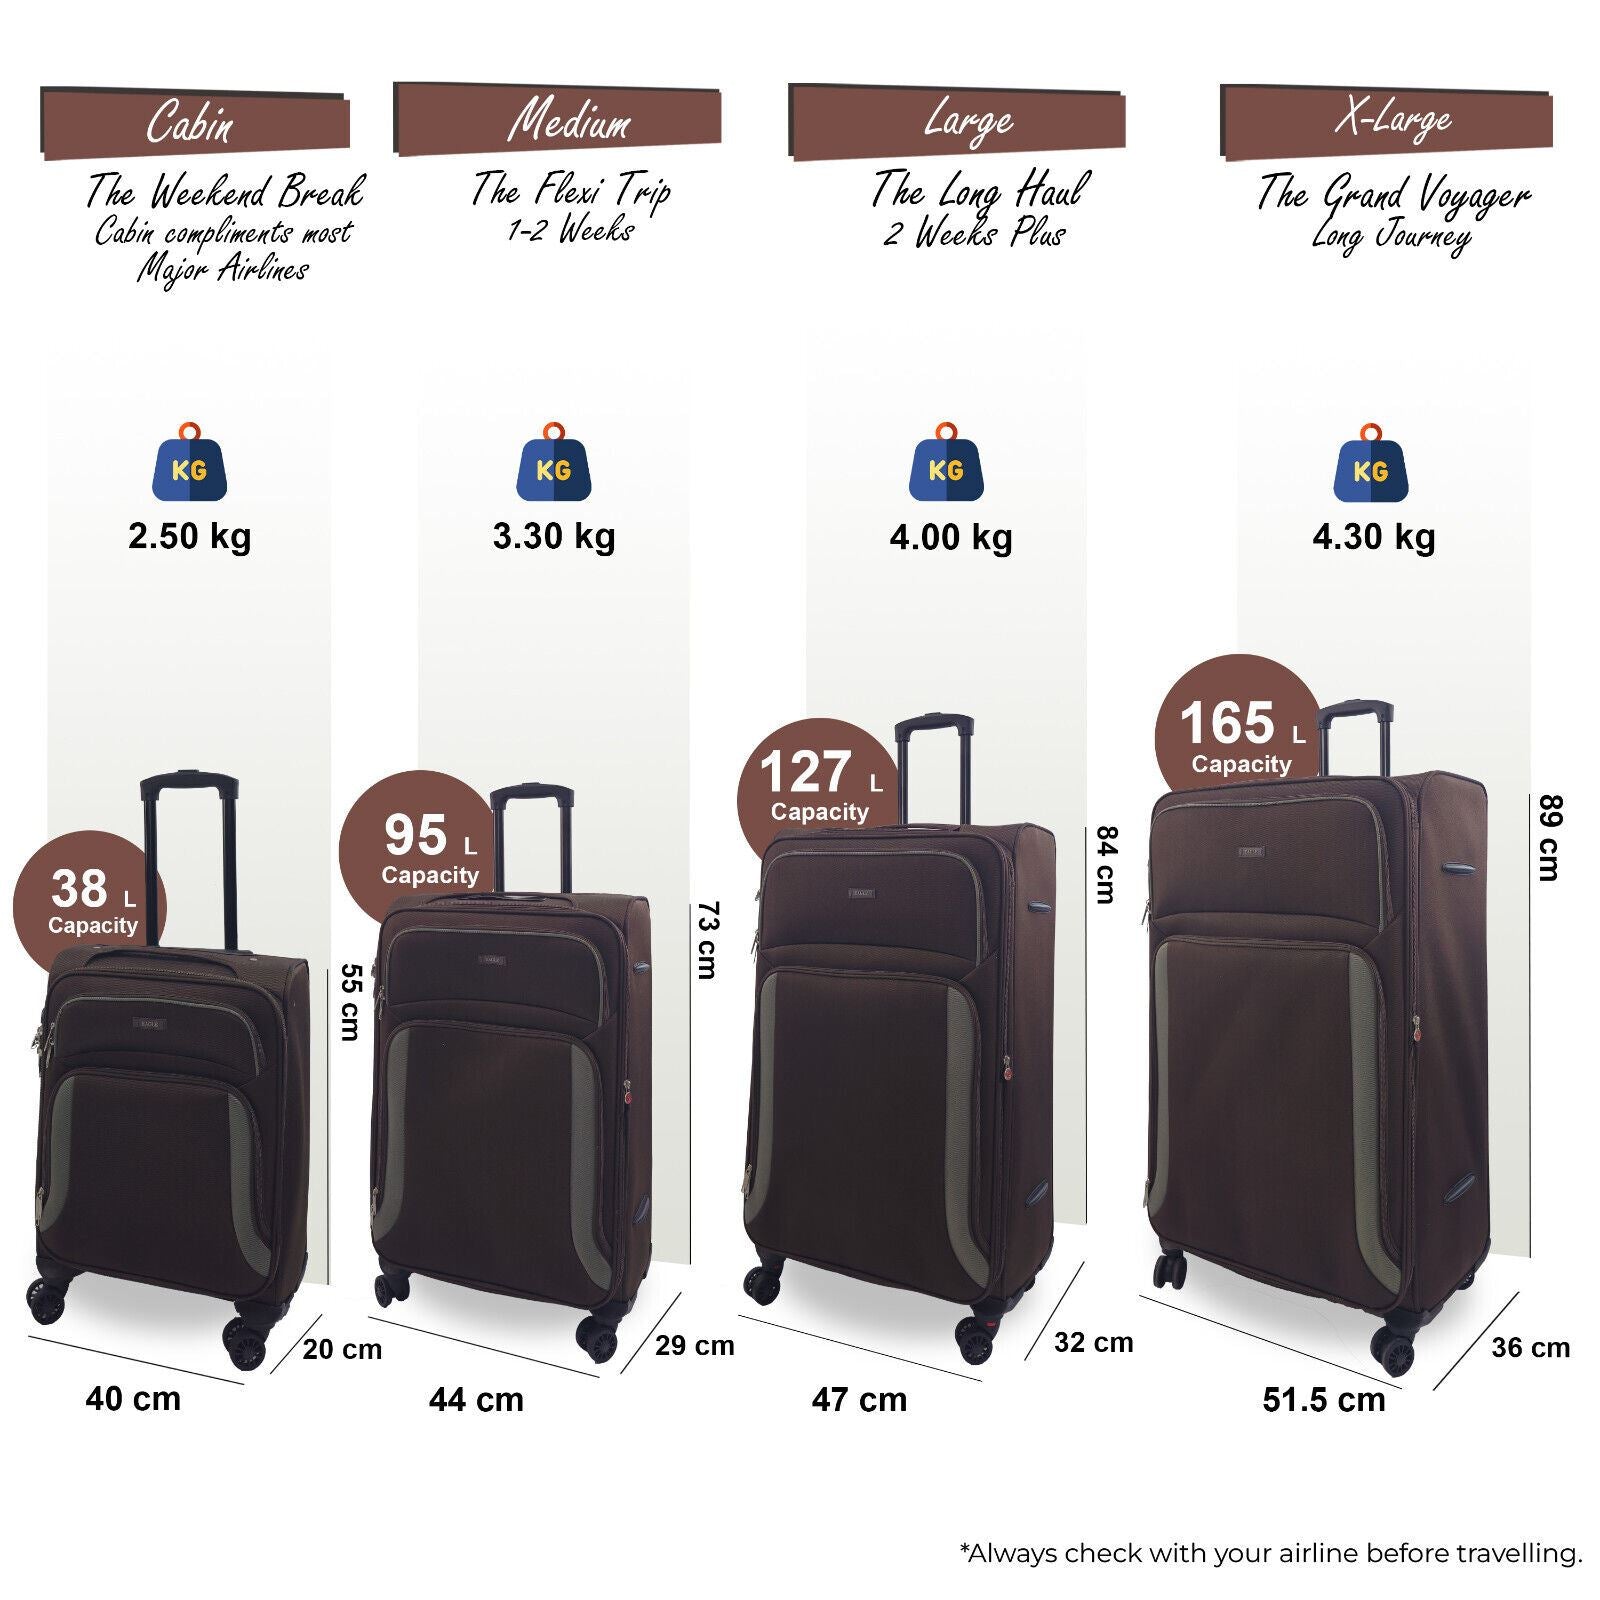 Ashland Set of 4 Soft Shell Suitcase in Brown